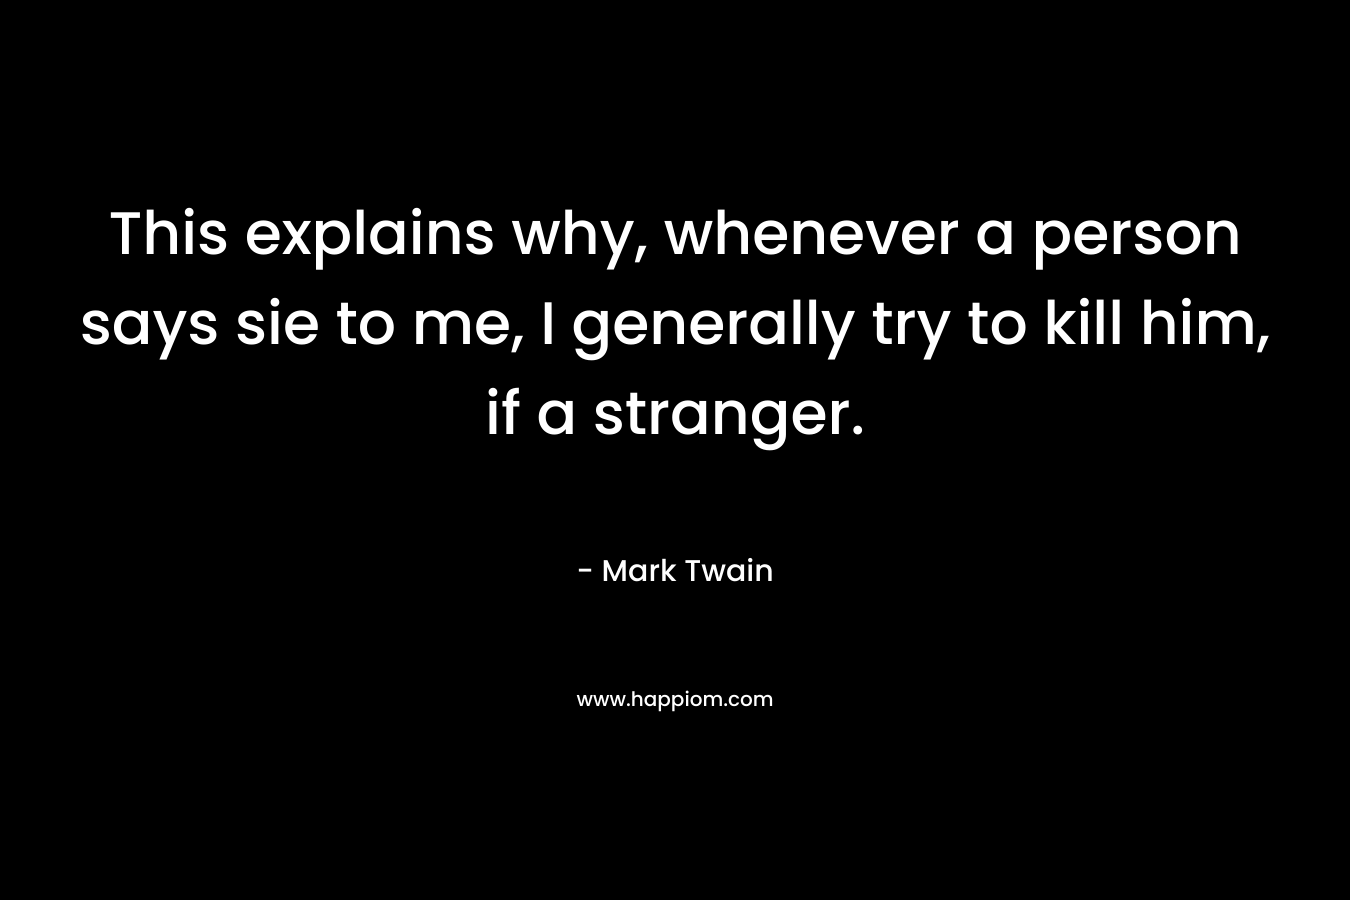 This explains why, whenever a person says sie to me, I generally try to kill him, if a stranger.